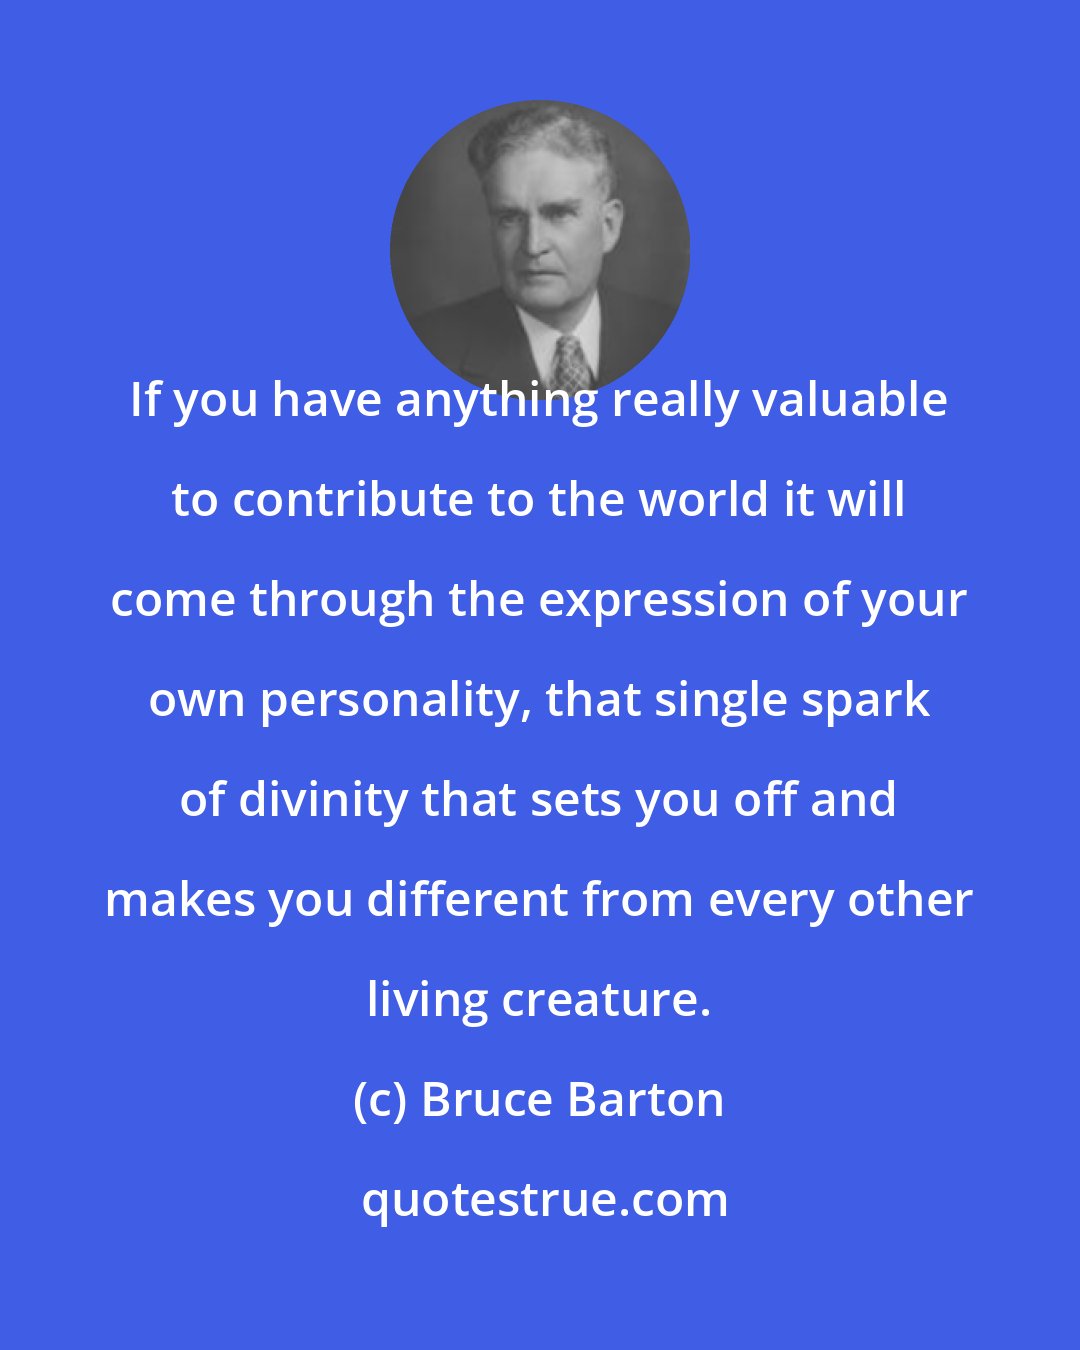 Bruce Barton: If you have anything really valuable to contribute to the world it will come through the expression of your own personality, that single spark of divinity that sets you off and makes you different from every other living creature.